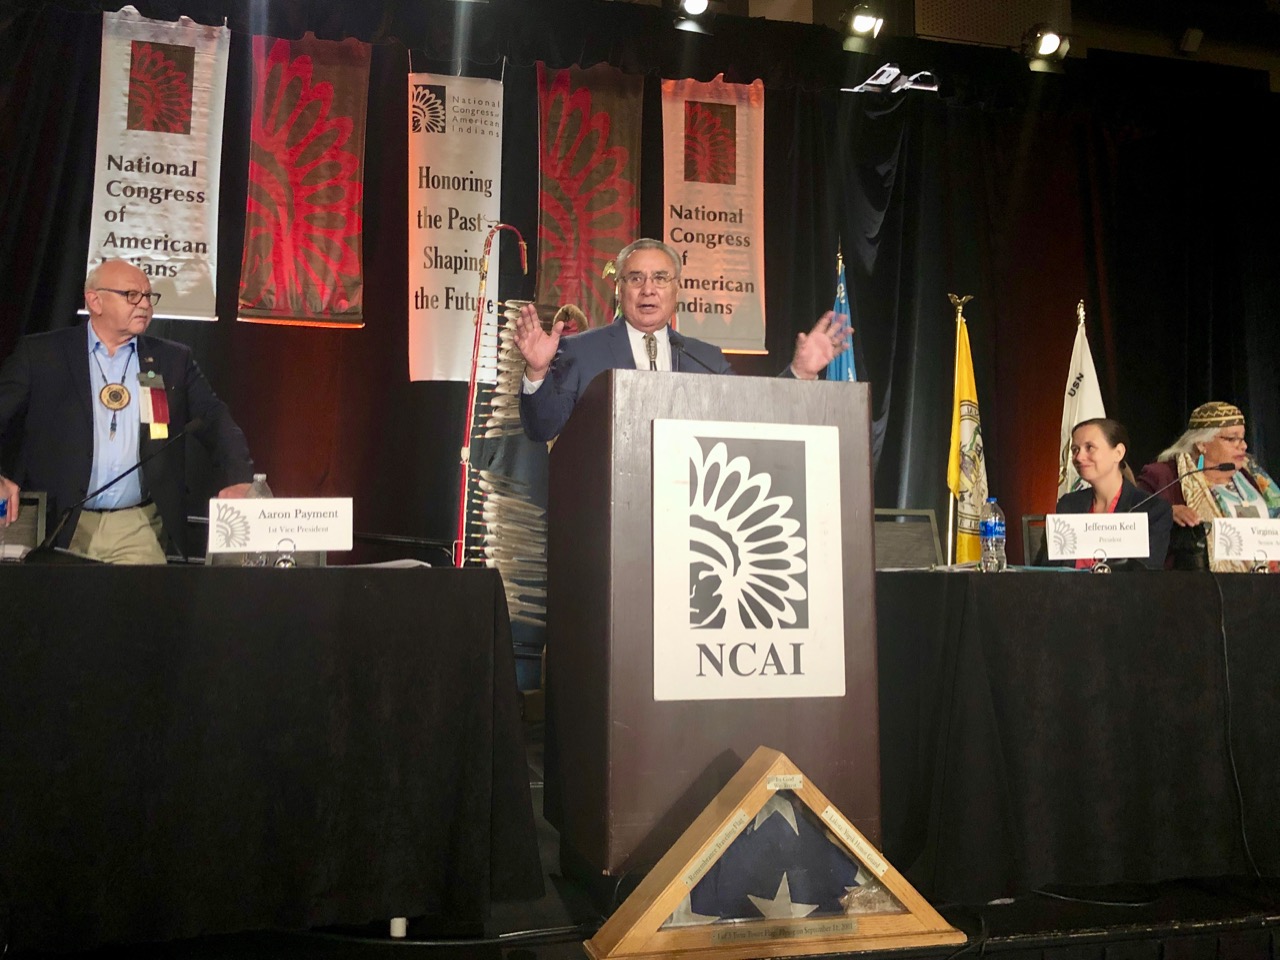 National Congress of American Indians opens annual convention amid controversy